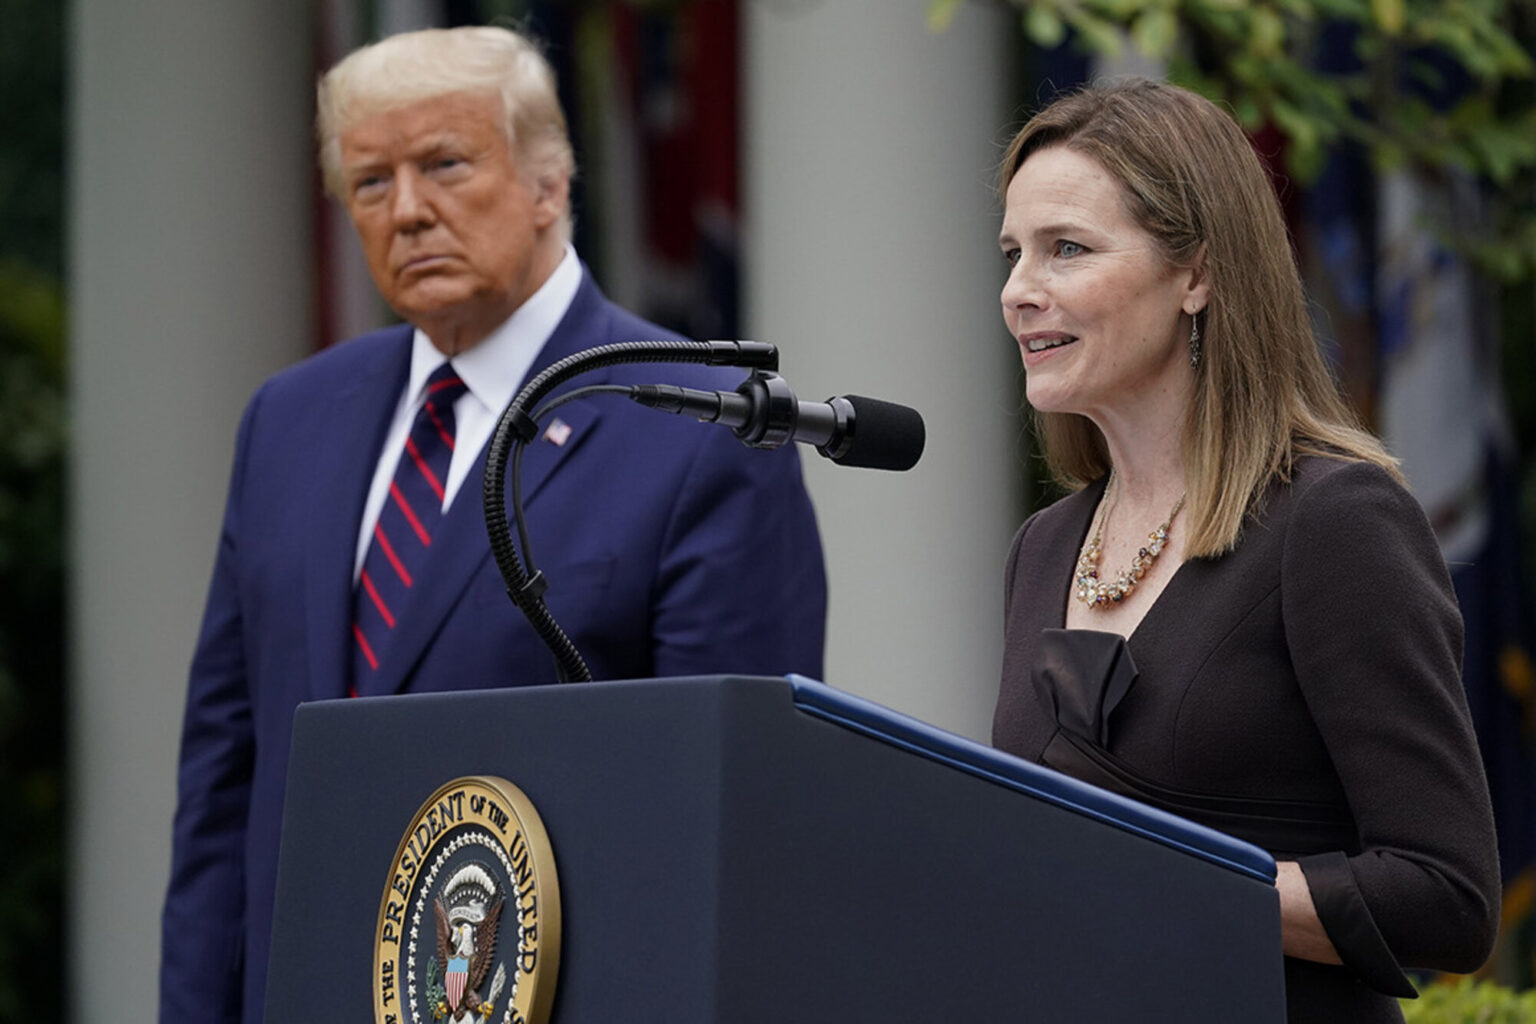 Learn about Donald Trump's nominee for the U.S. Supreme Court, Amy Coney Barrett, and her judicial record.